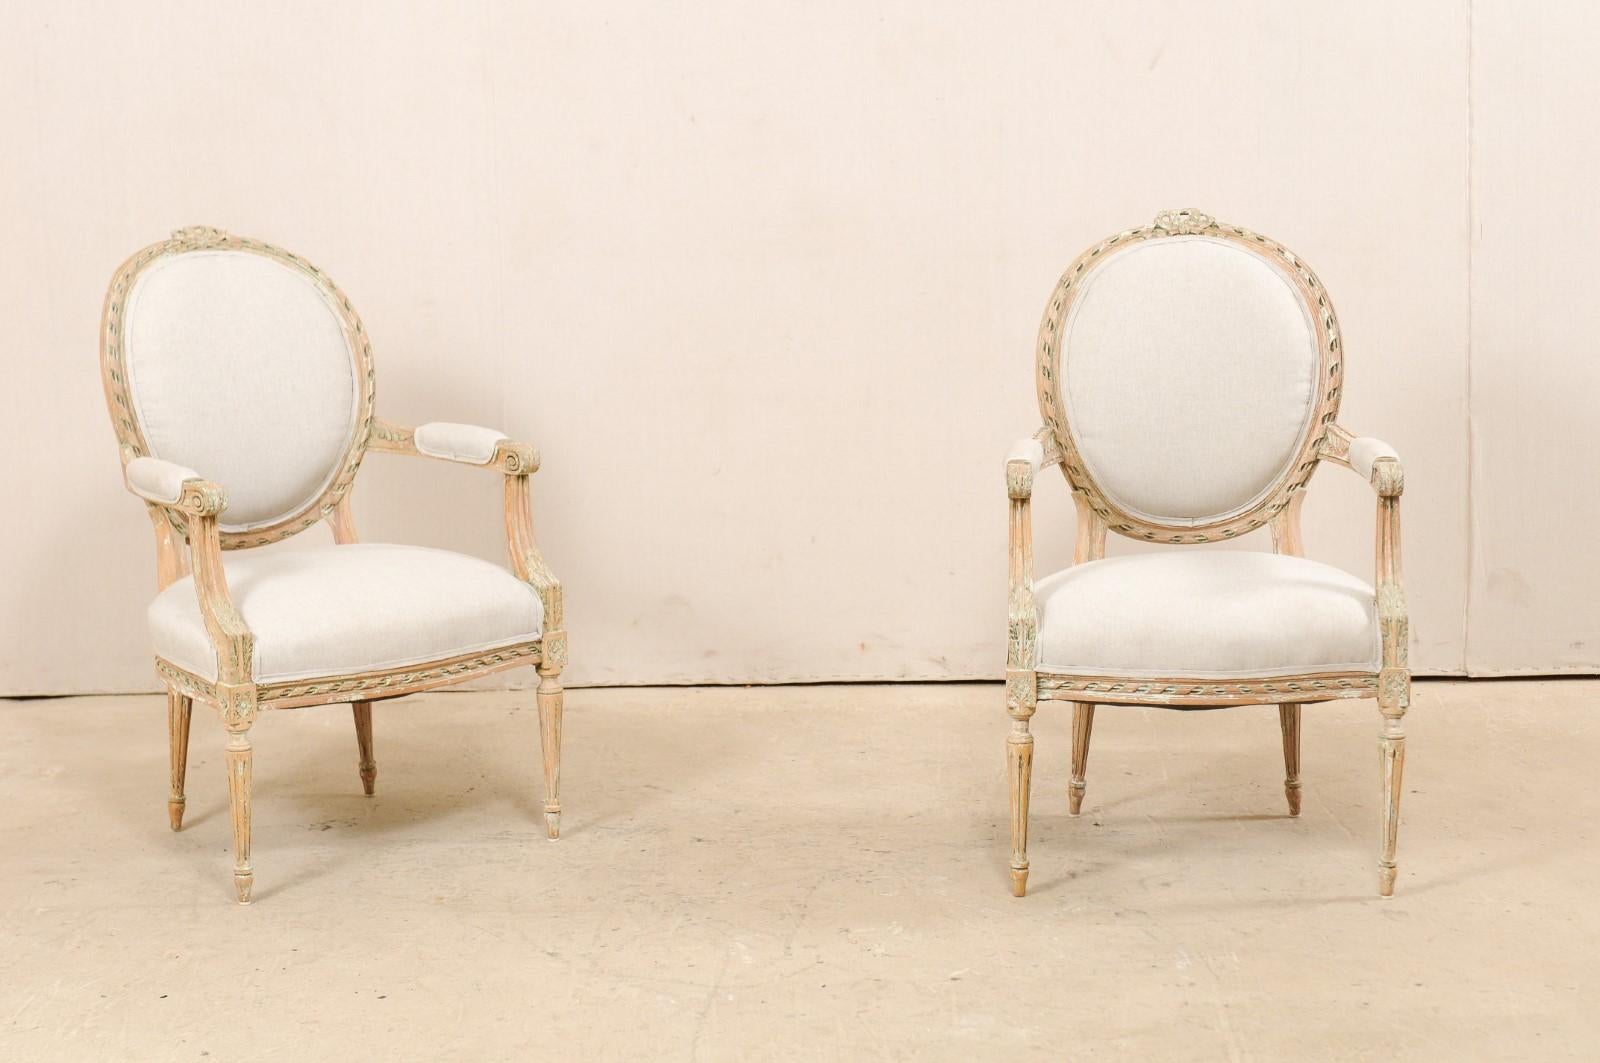 A pair of French carved wood and upholstered bergères chairs from the mid-20th century. This vintage pair of armchairs from France each feature oval-shaped upholstered backs with a wood frame accentuated with spiraled ribbon carved trim and pierced